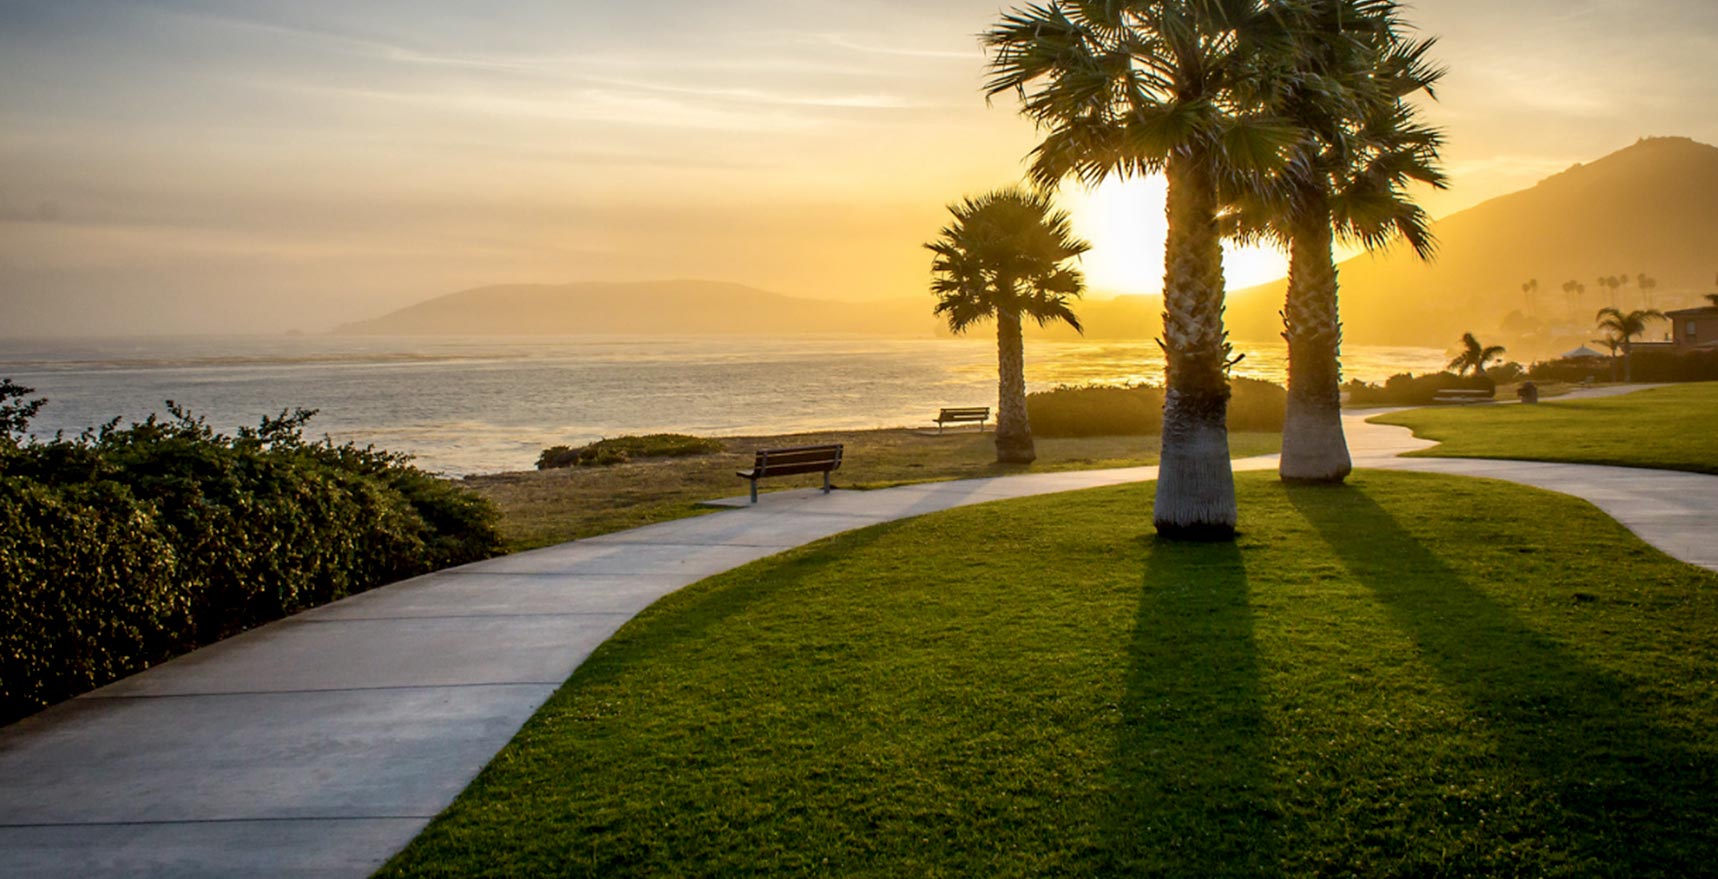 Walkway by the ocean at sunset